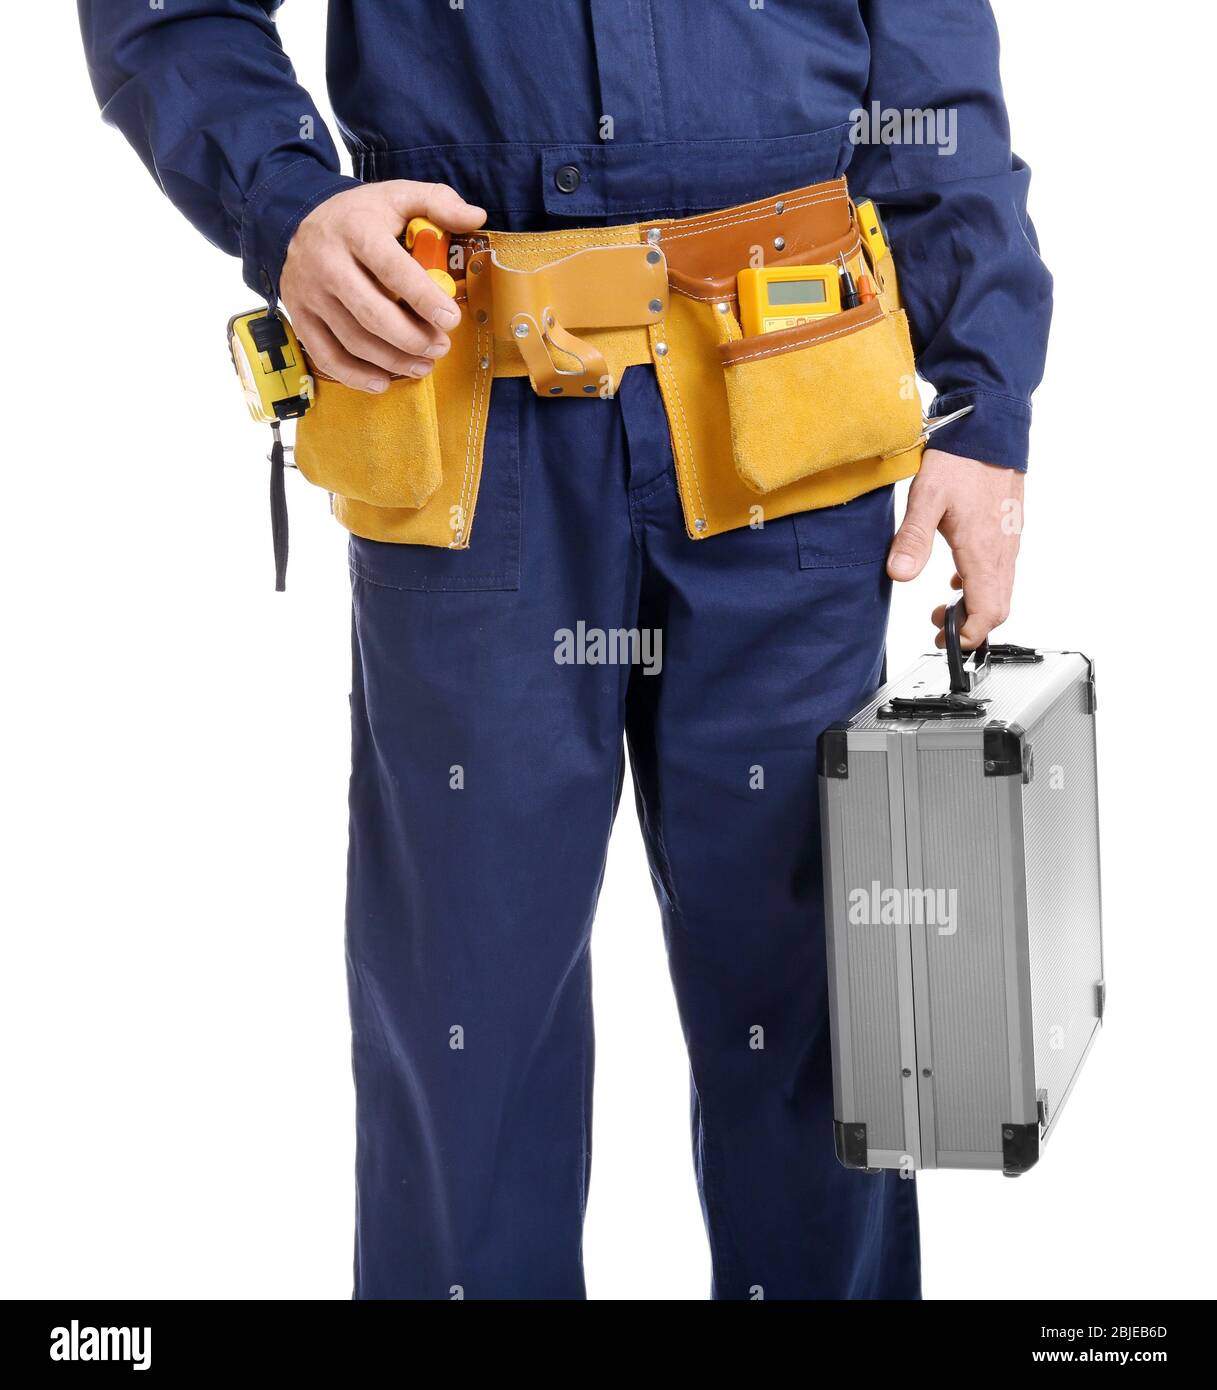 Electrician with tool box on white background, closeup Stock Photo